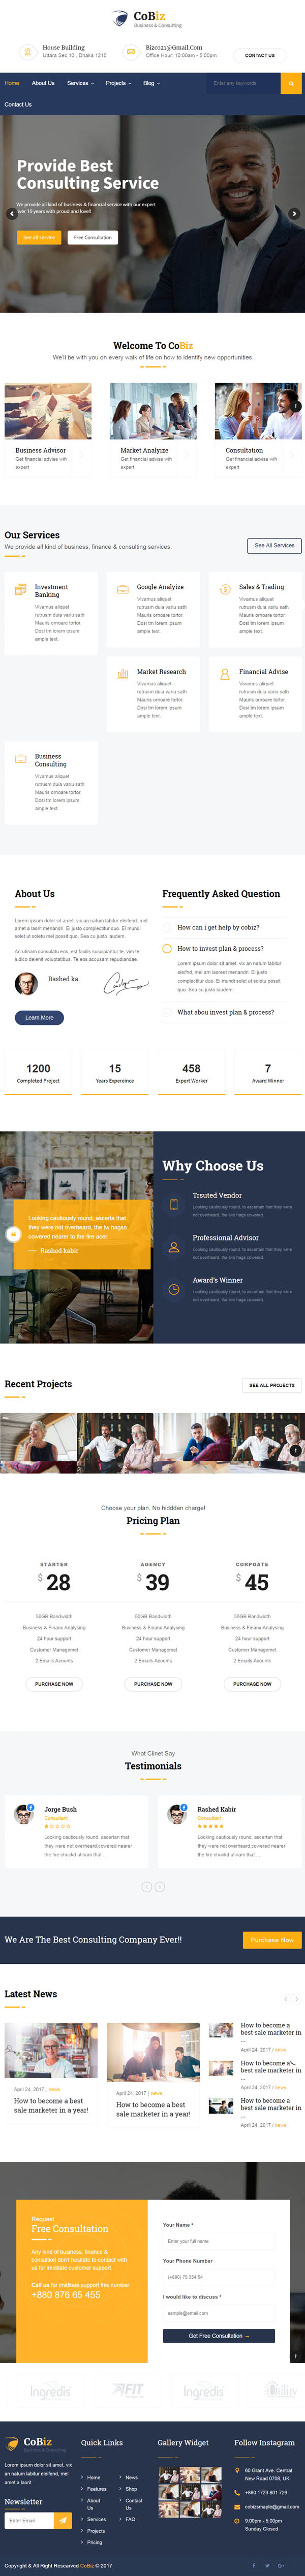 Cobiz -Business Consulting and Professional Services WordPress Theme